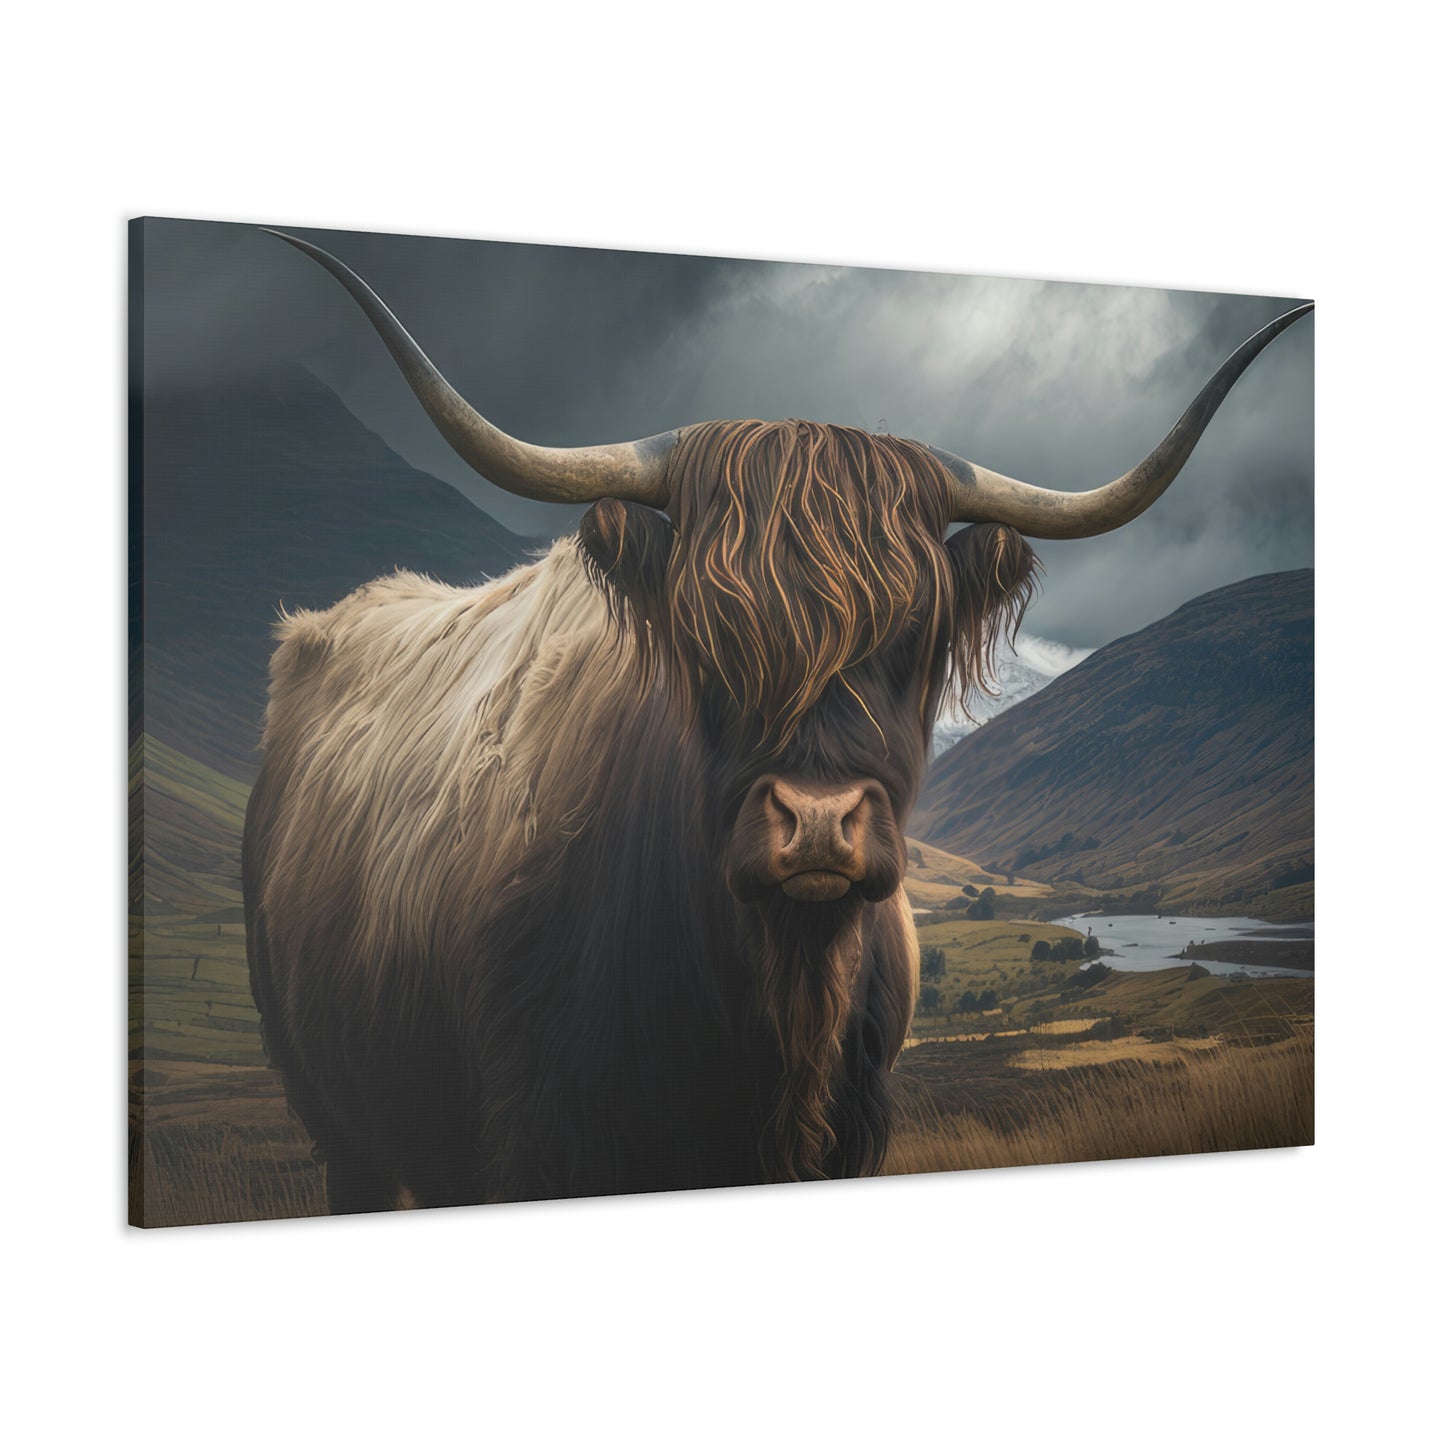 A Highland Cow's Tranquil Cloudscape